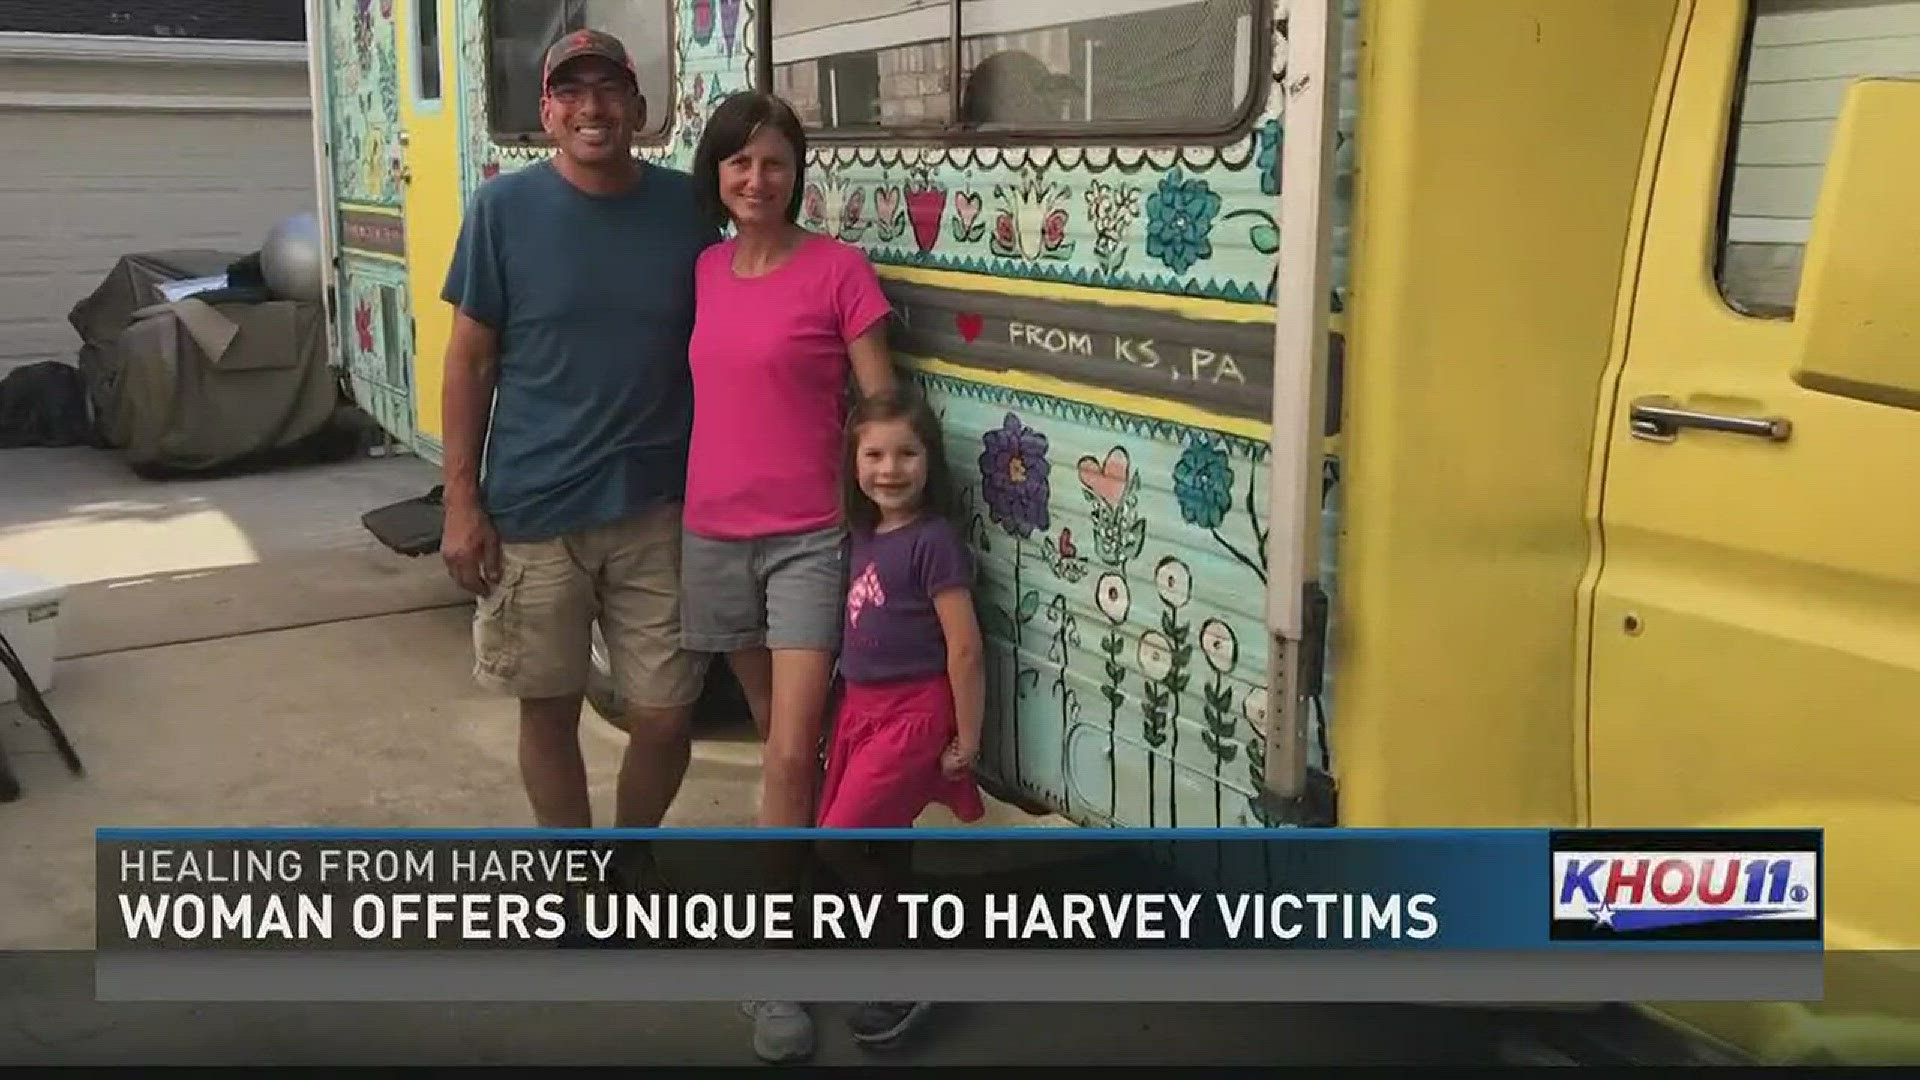 A Houston family is living in an eye-catching RV until renovations are done on their flood-damaged home.